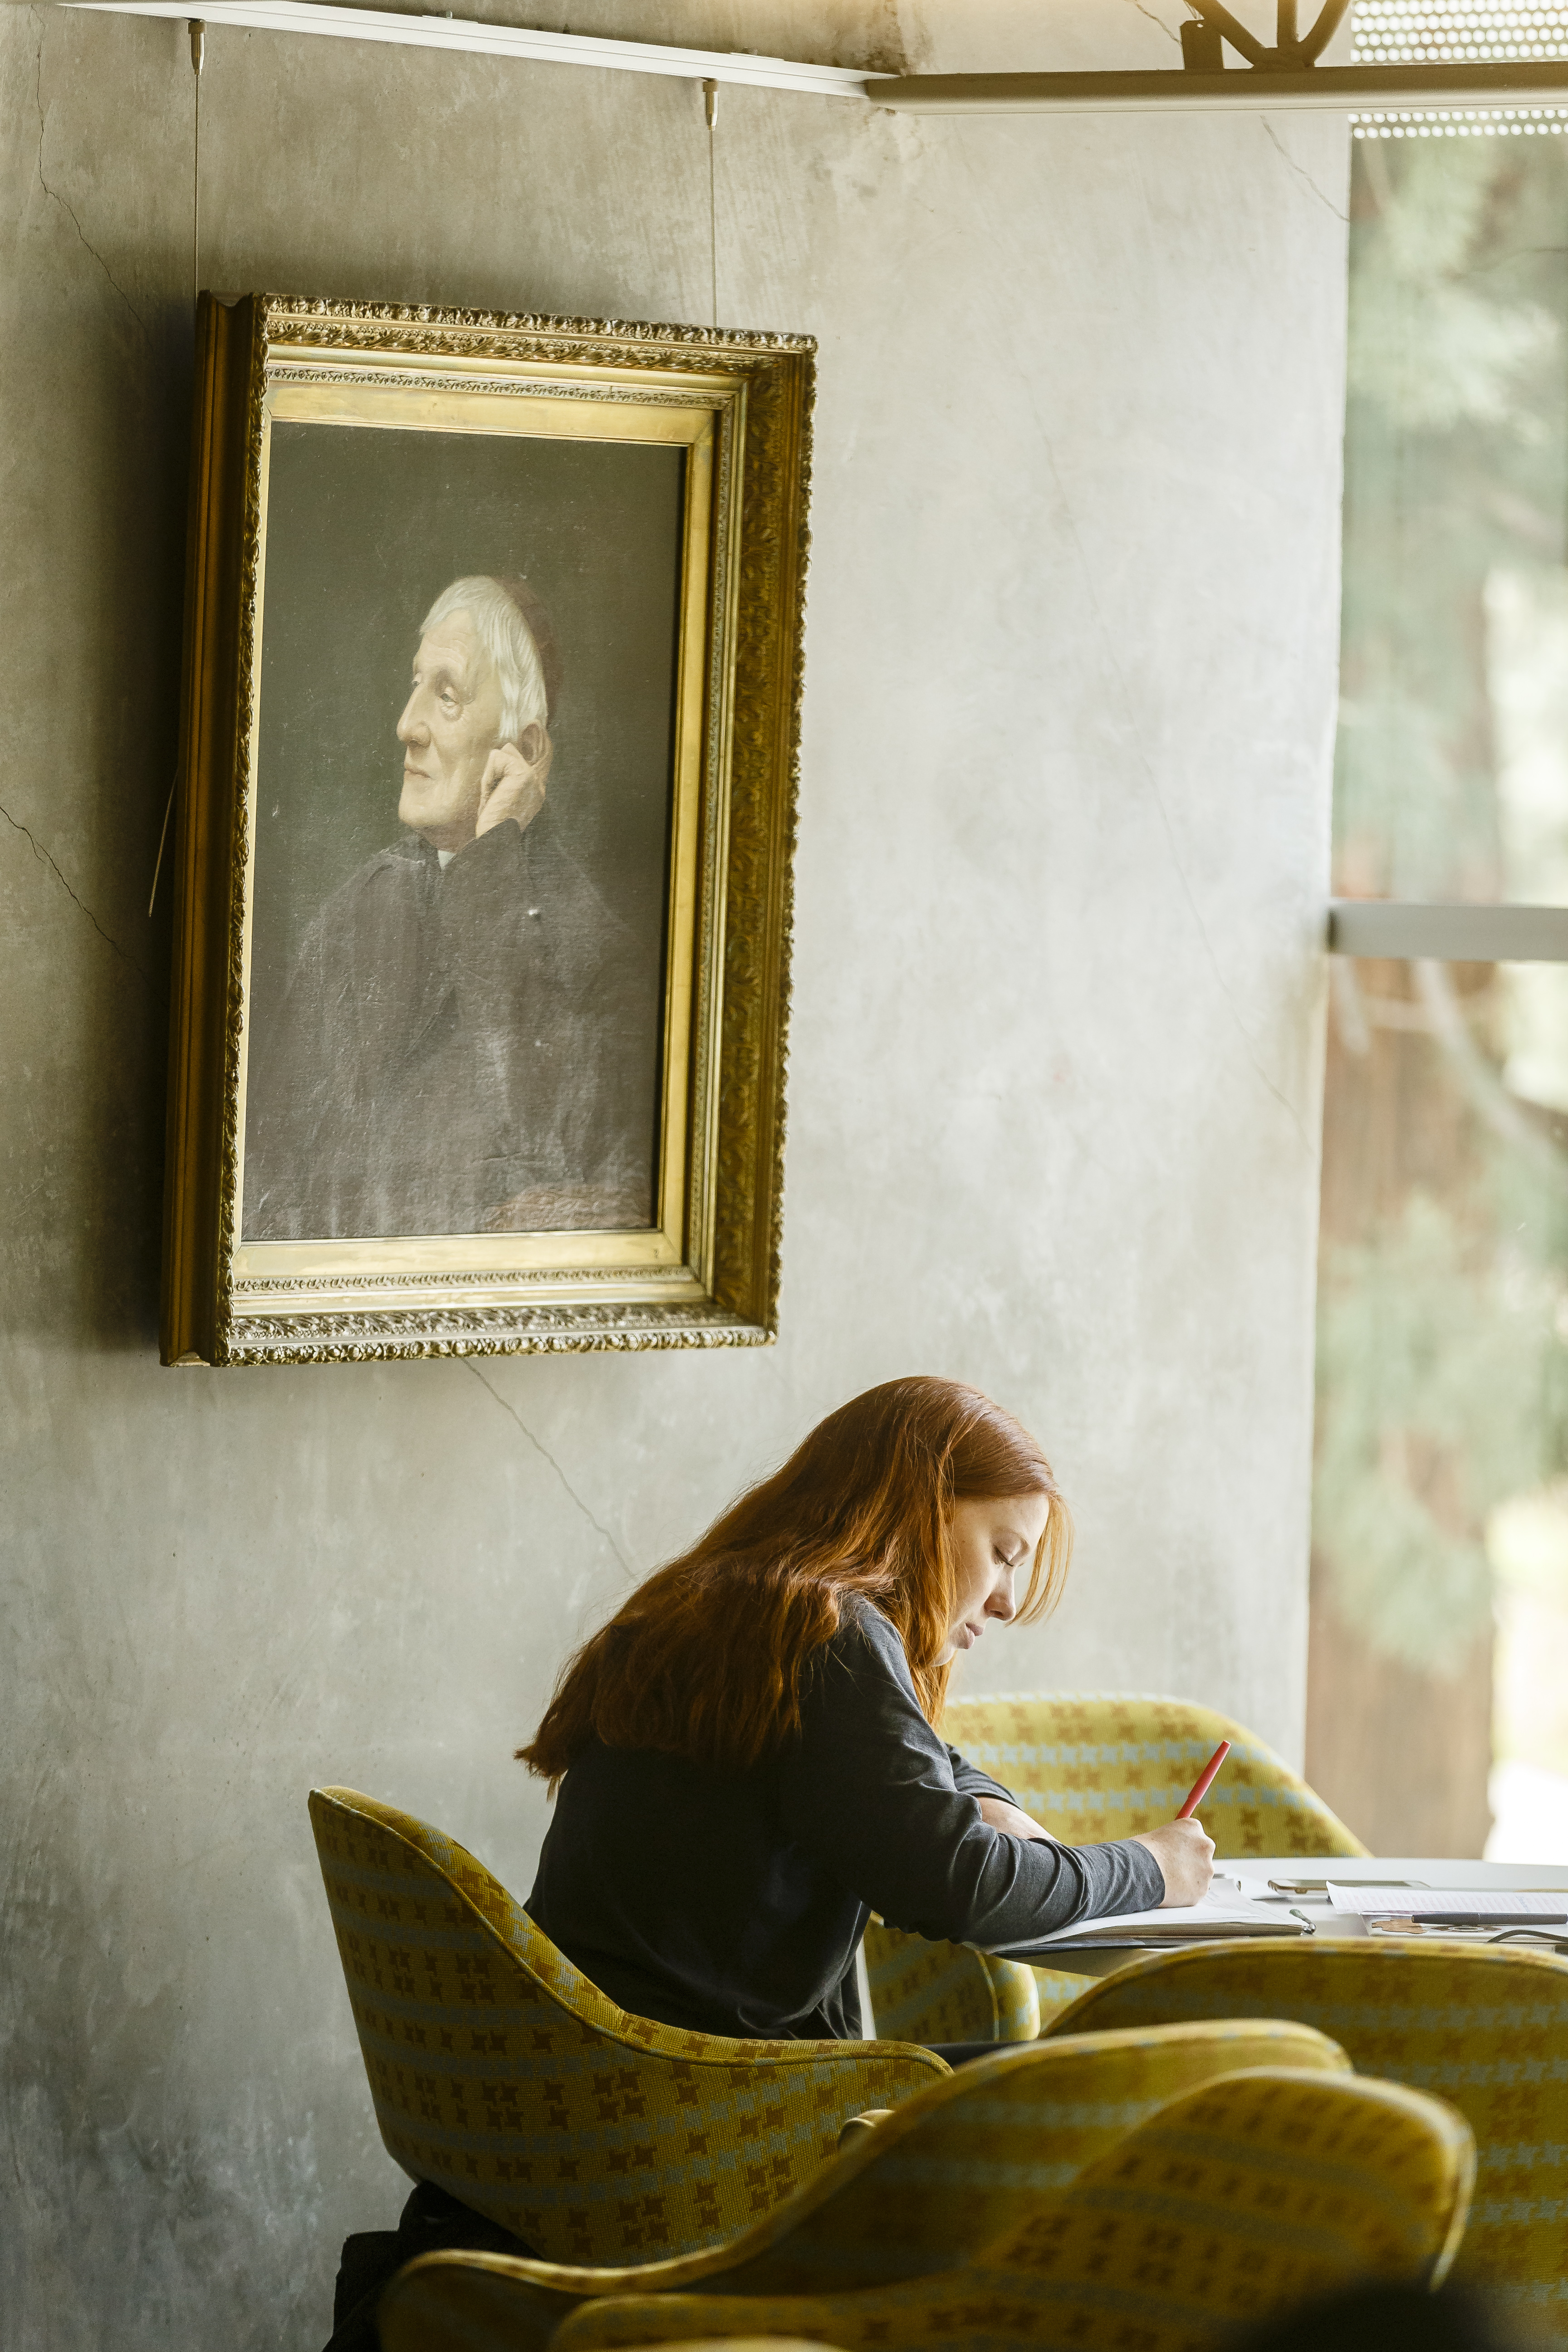 A student studying in the Clark Library under an antique portrait.